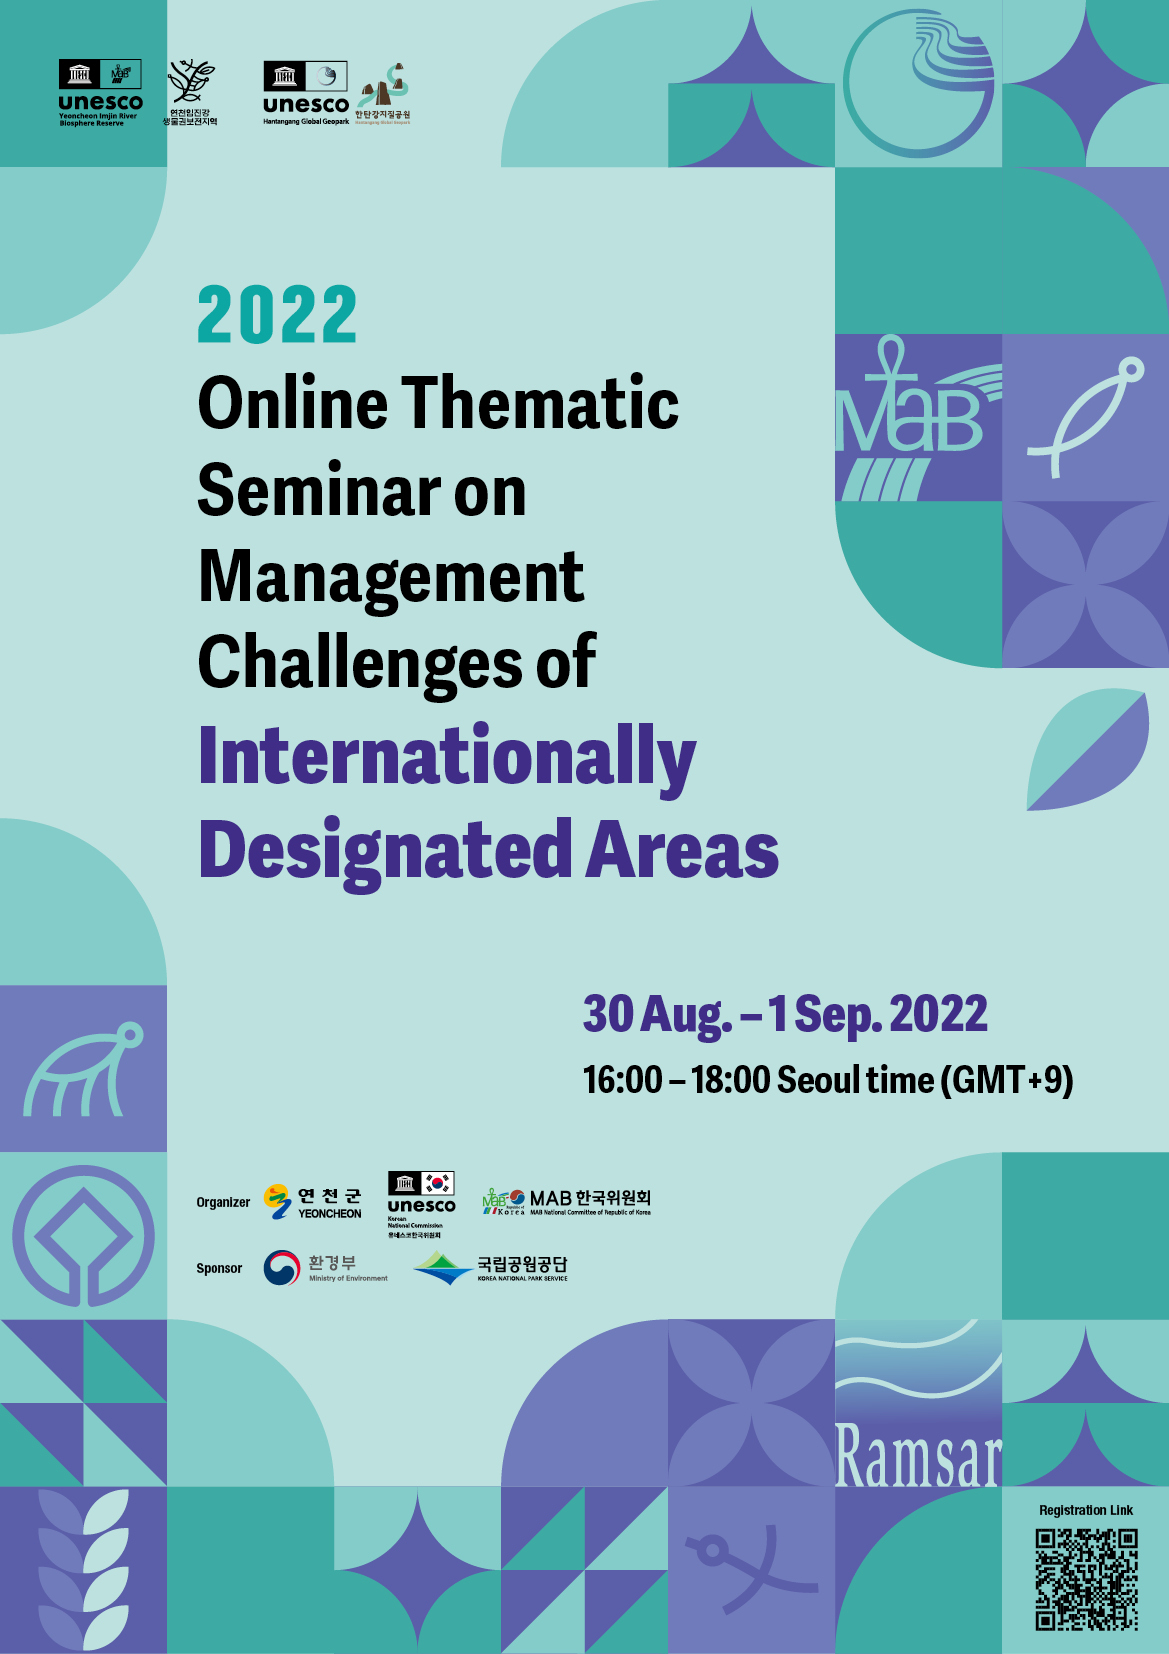 2022 Online Thematic Seminar on Management Challenges of IDAs image 1